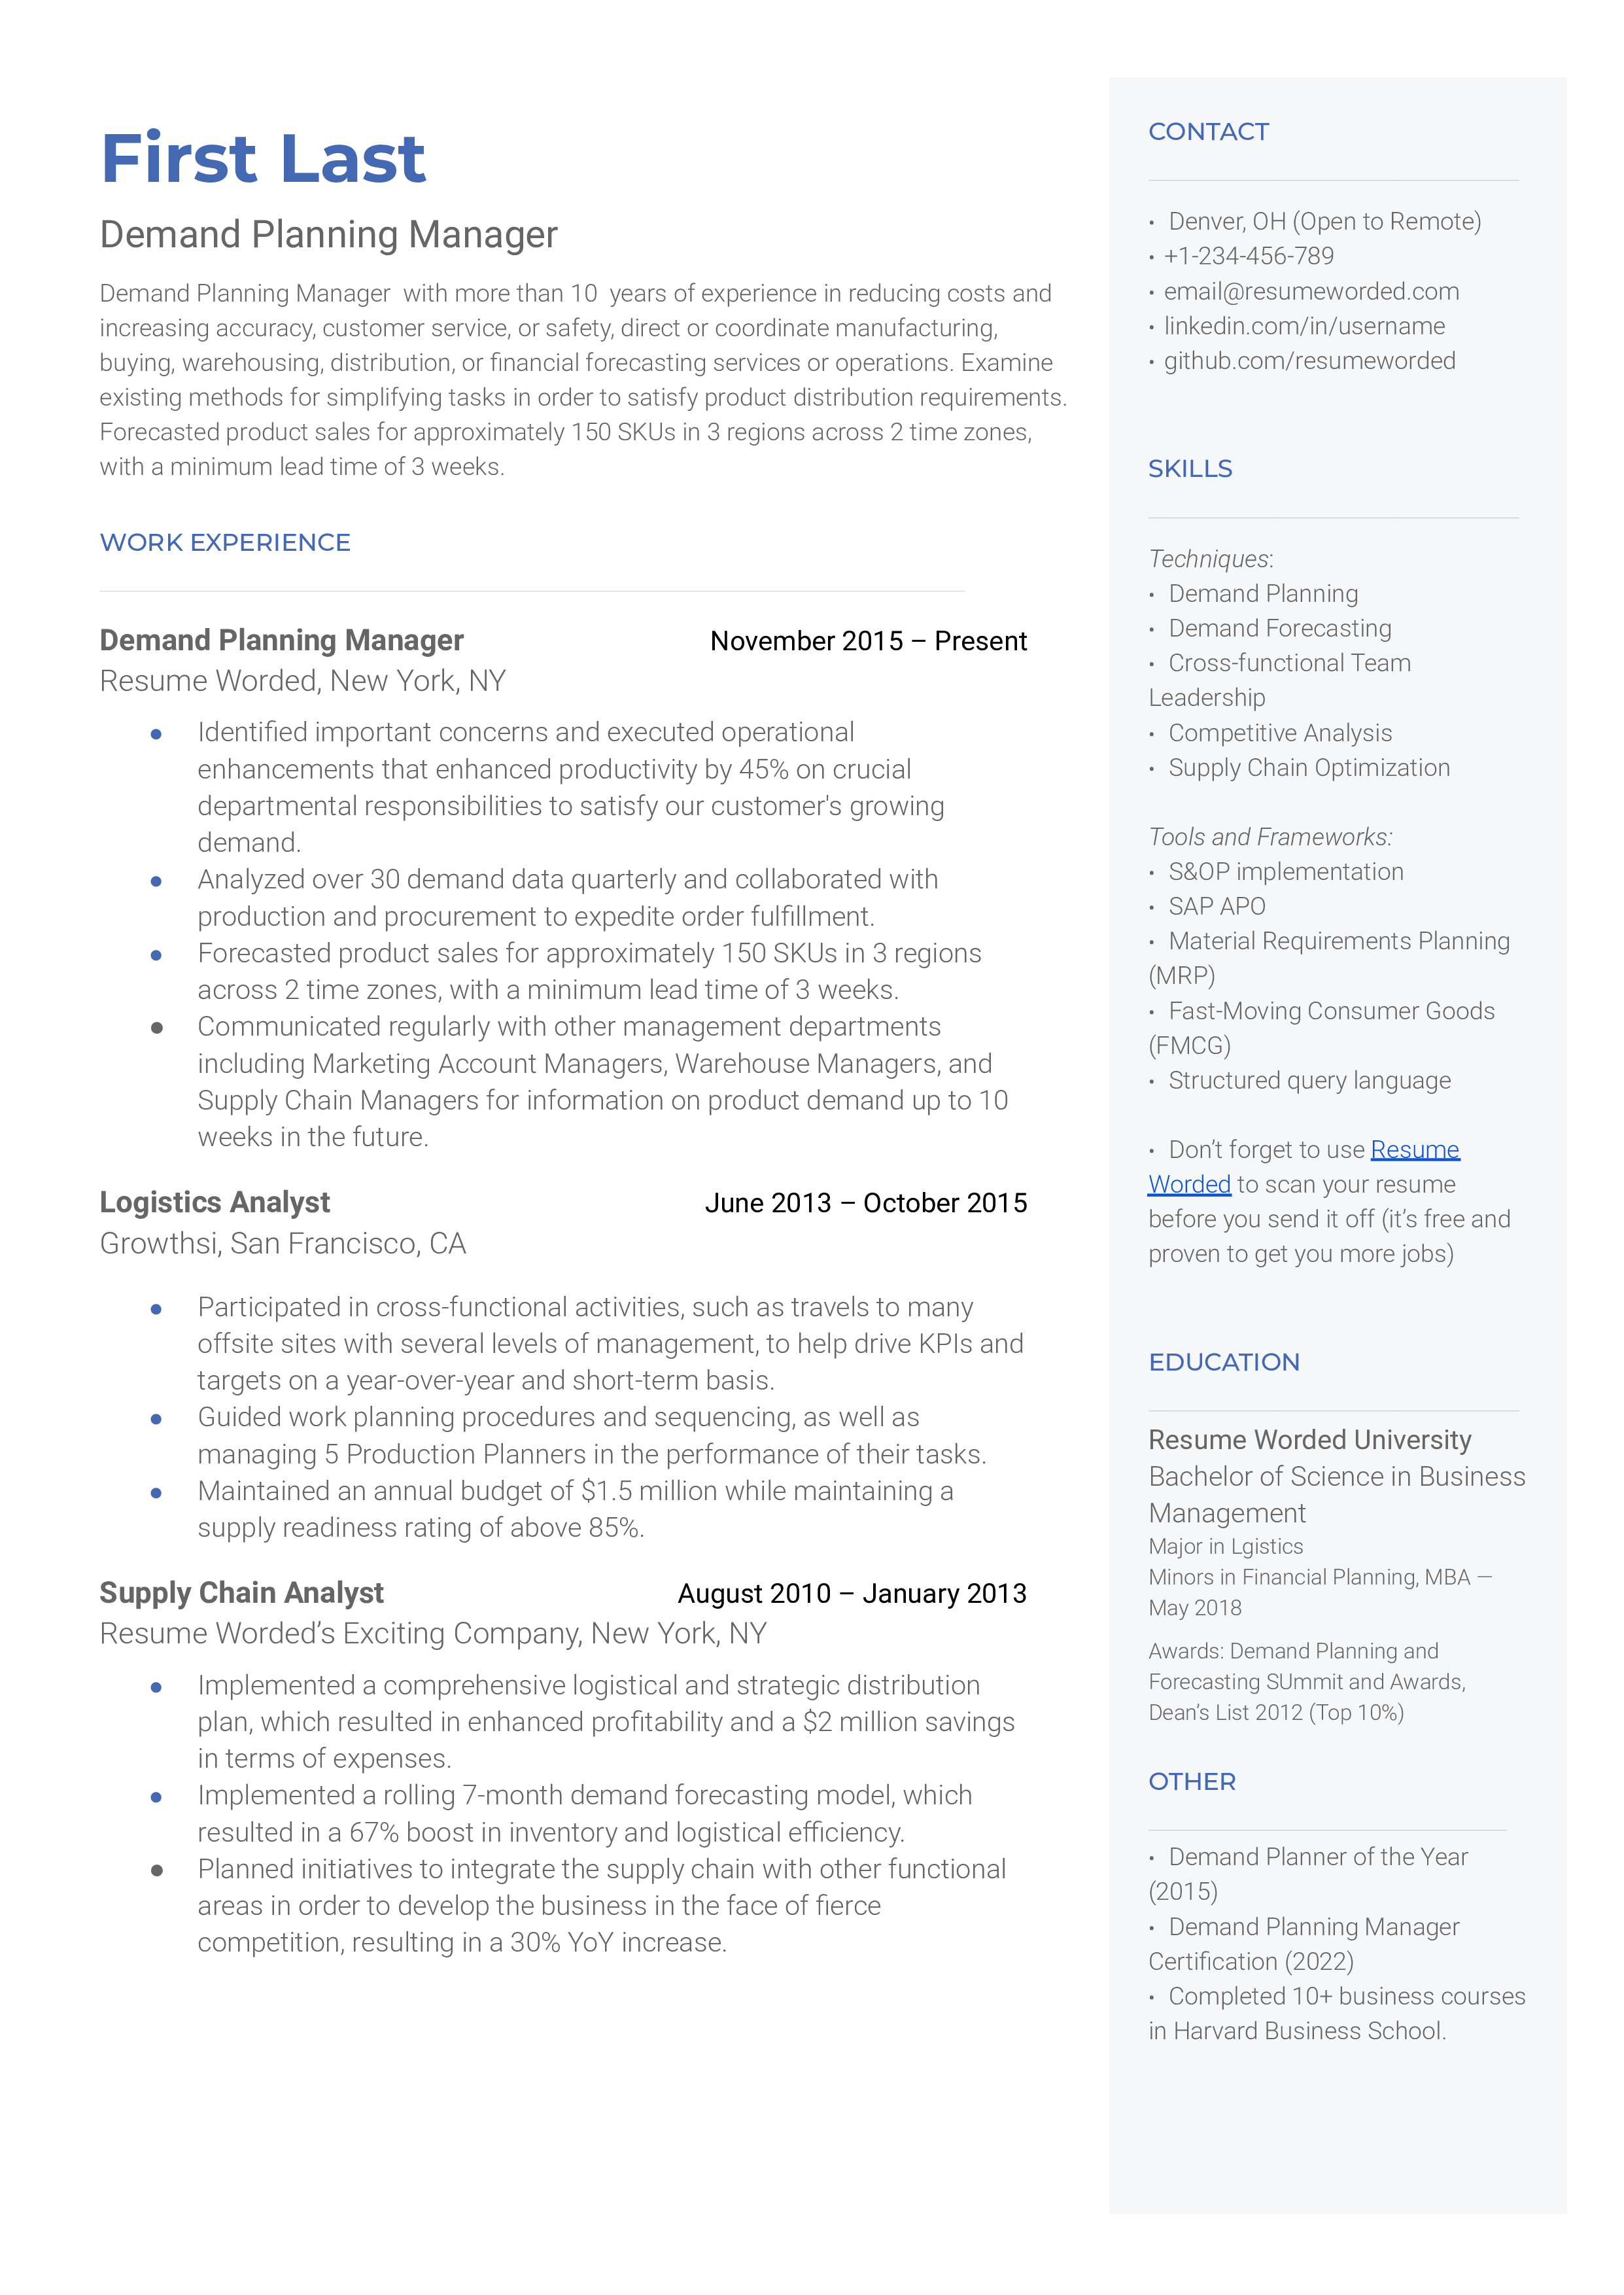 A demand planning manager resume template that outlines work experiences and relevant skills